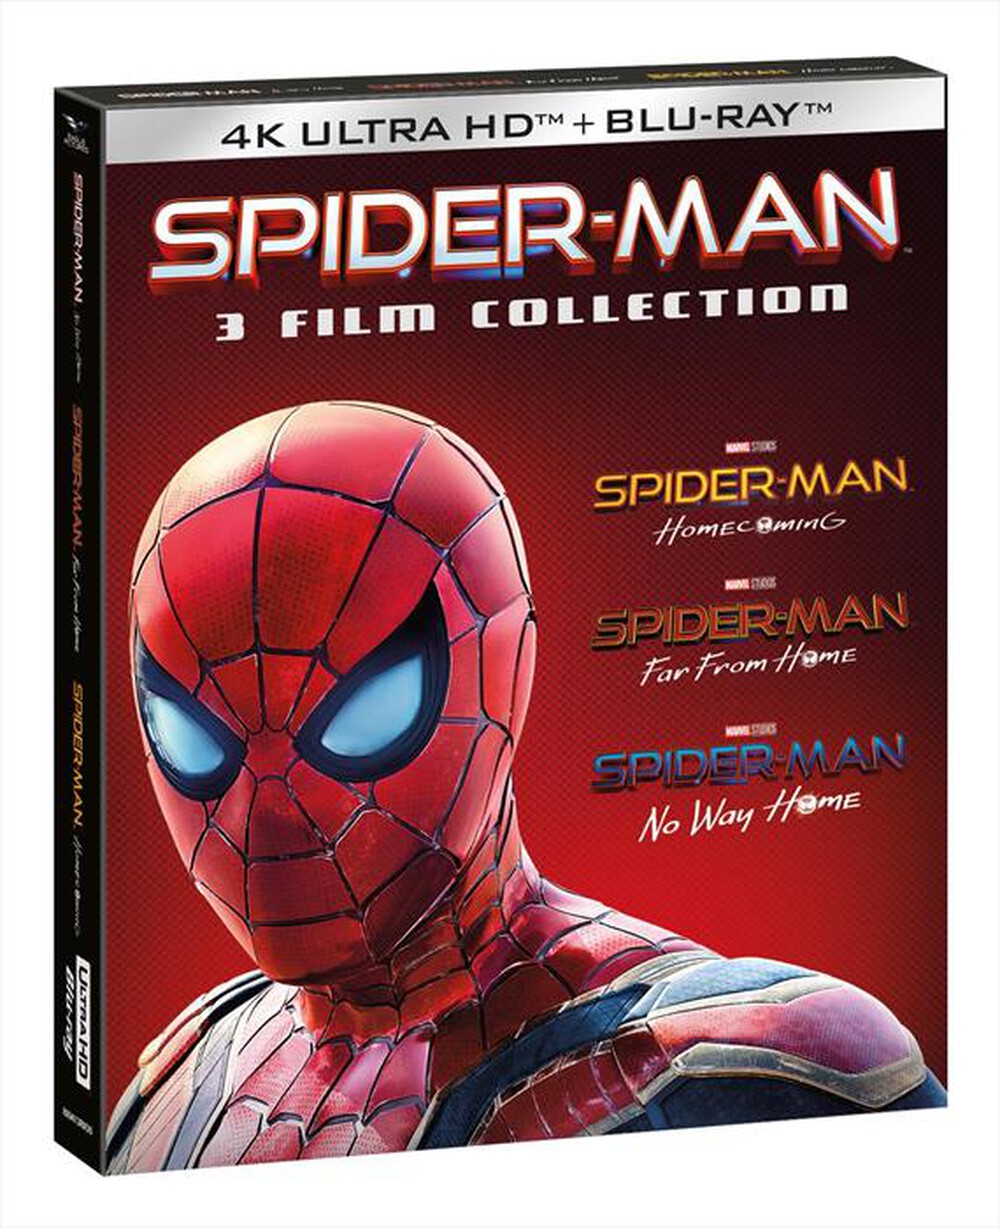 "EAGLE PICTURES - Spider-Man Home Collection (4K Ultra Hd+2 Blu-Ra"